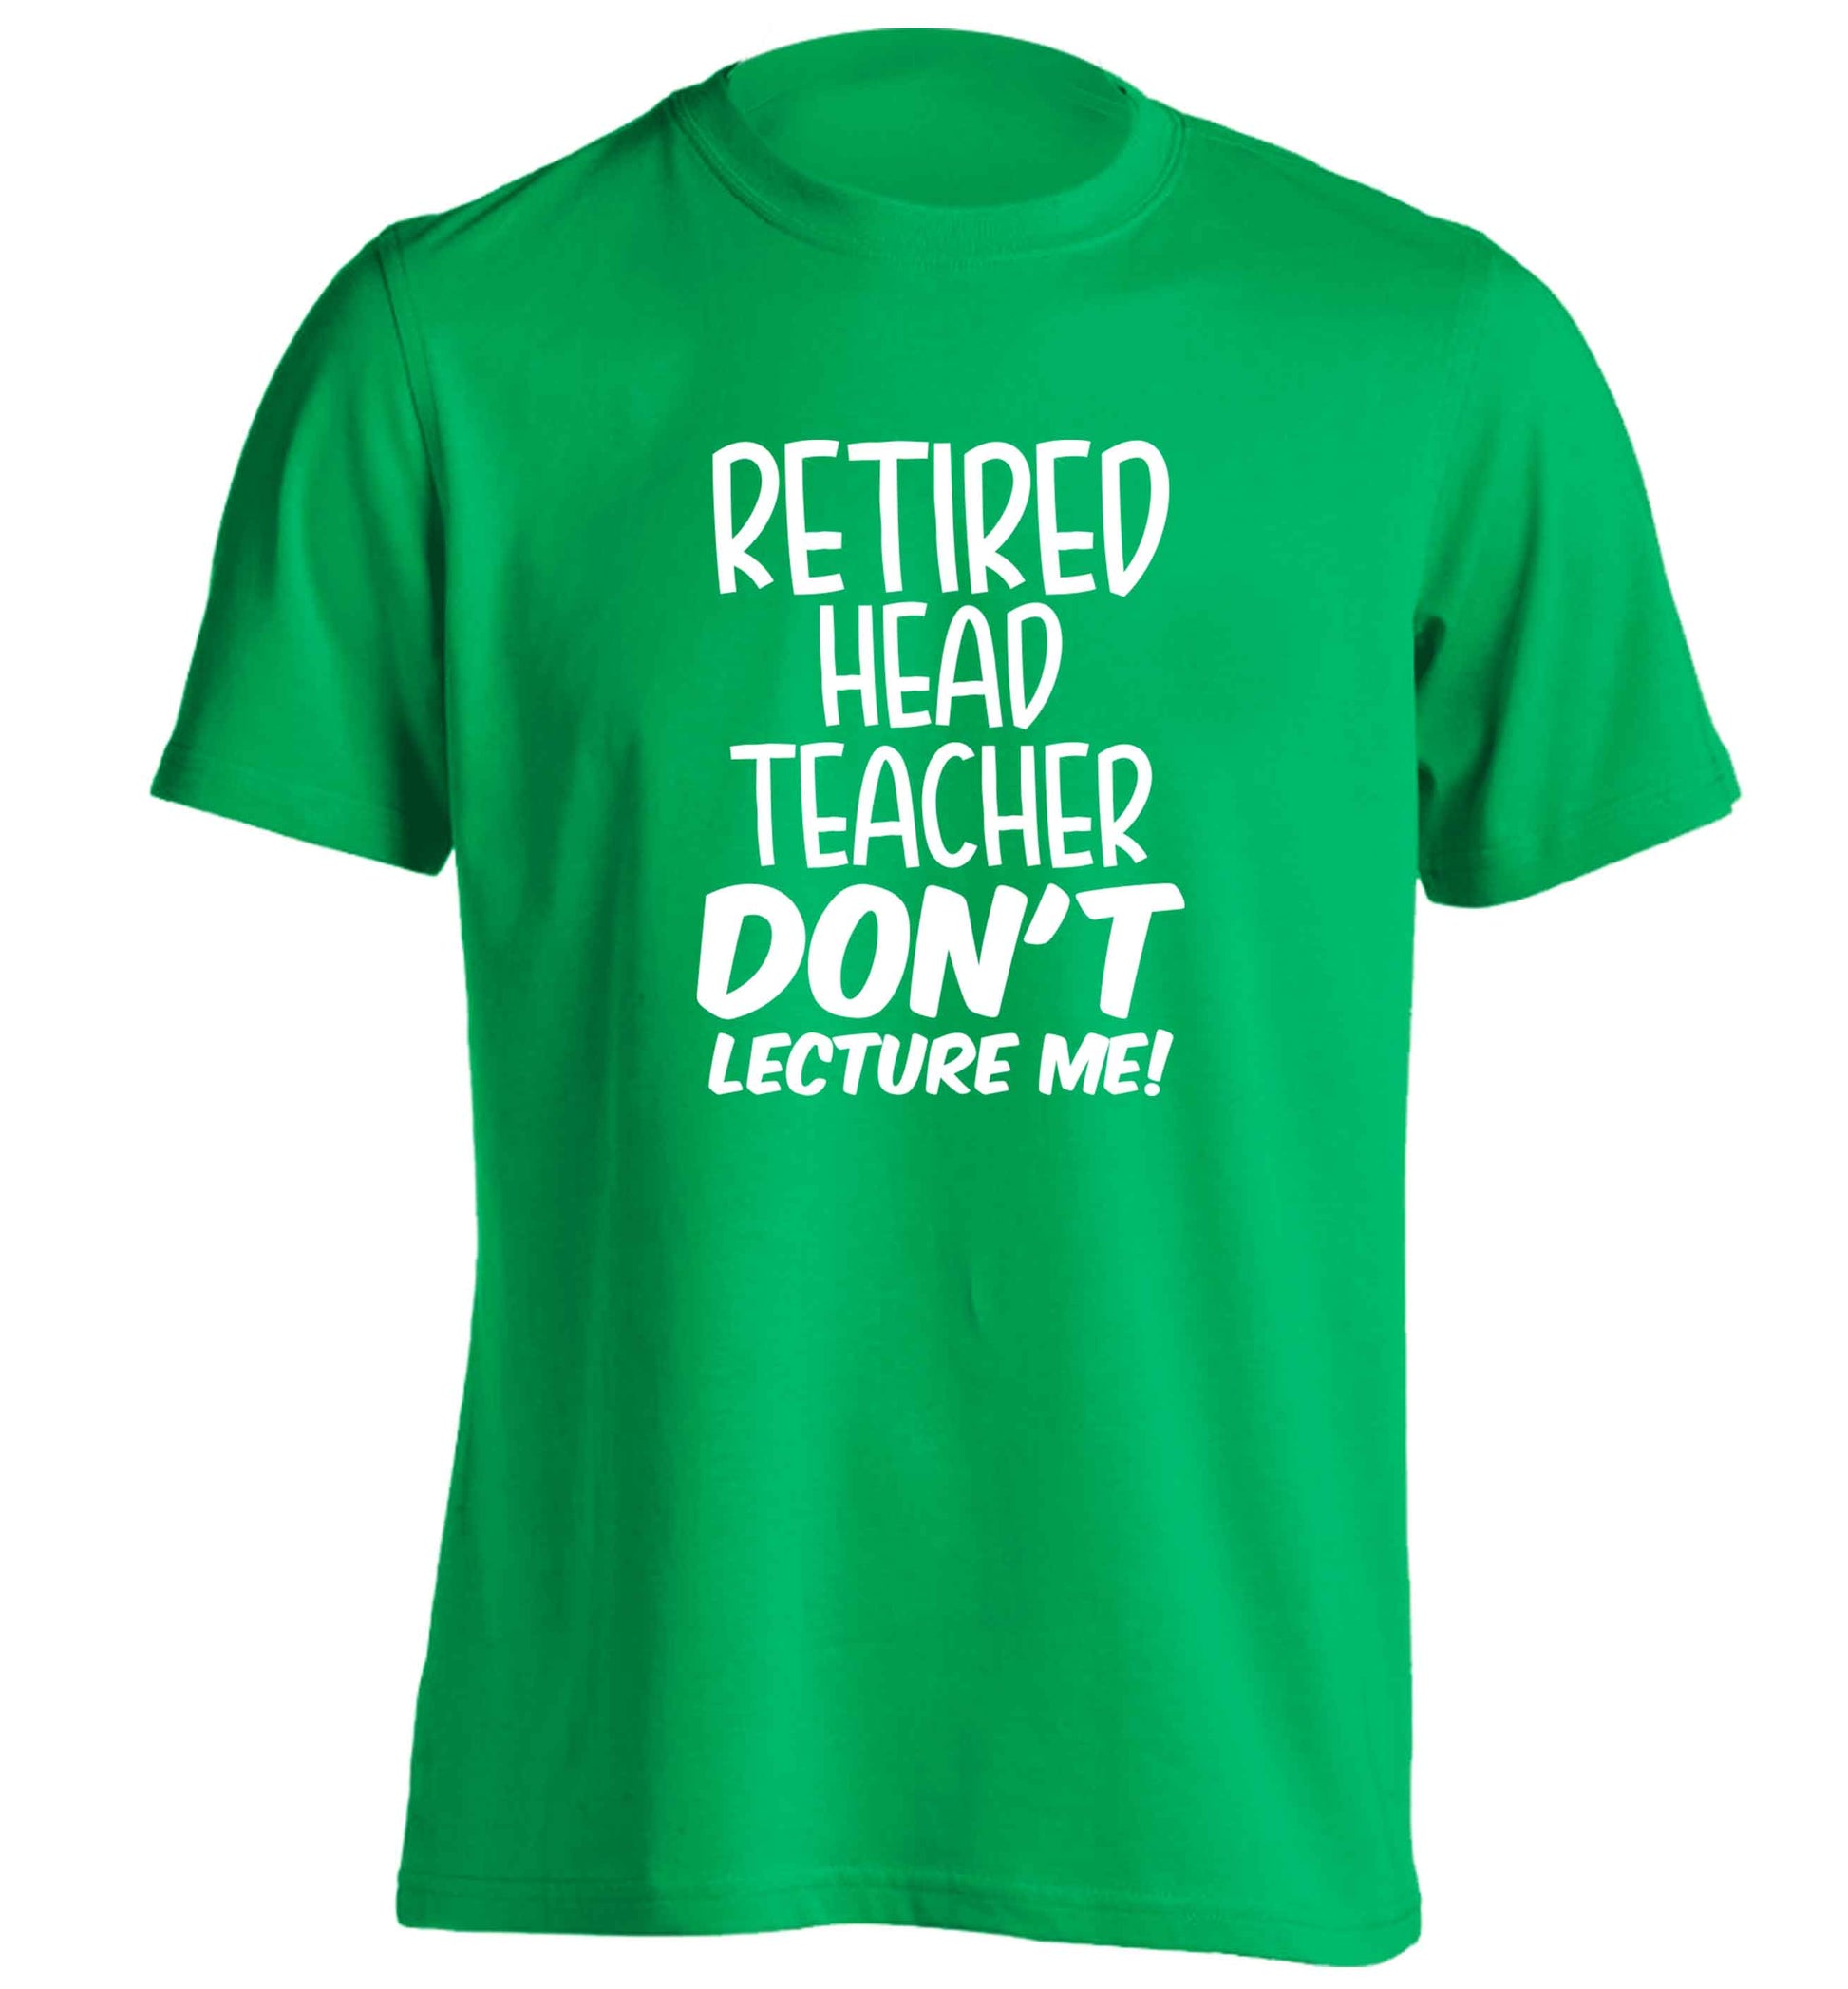 Retired head teacher don't lecture me! adults unisex green Tshirt 2XL